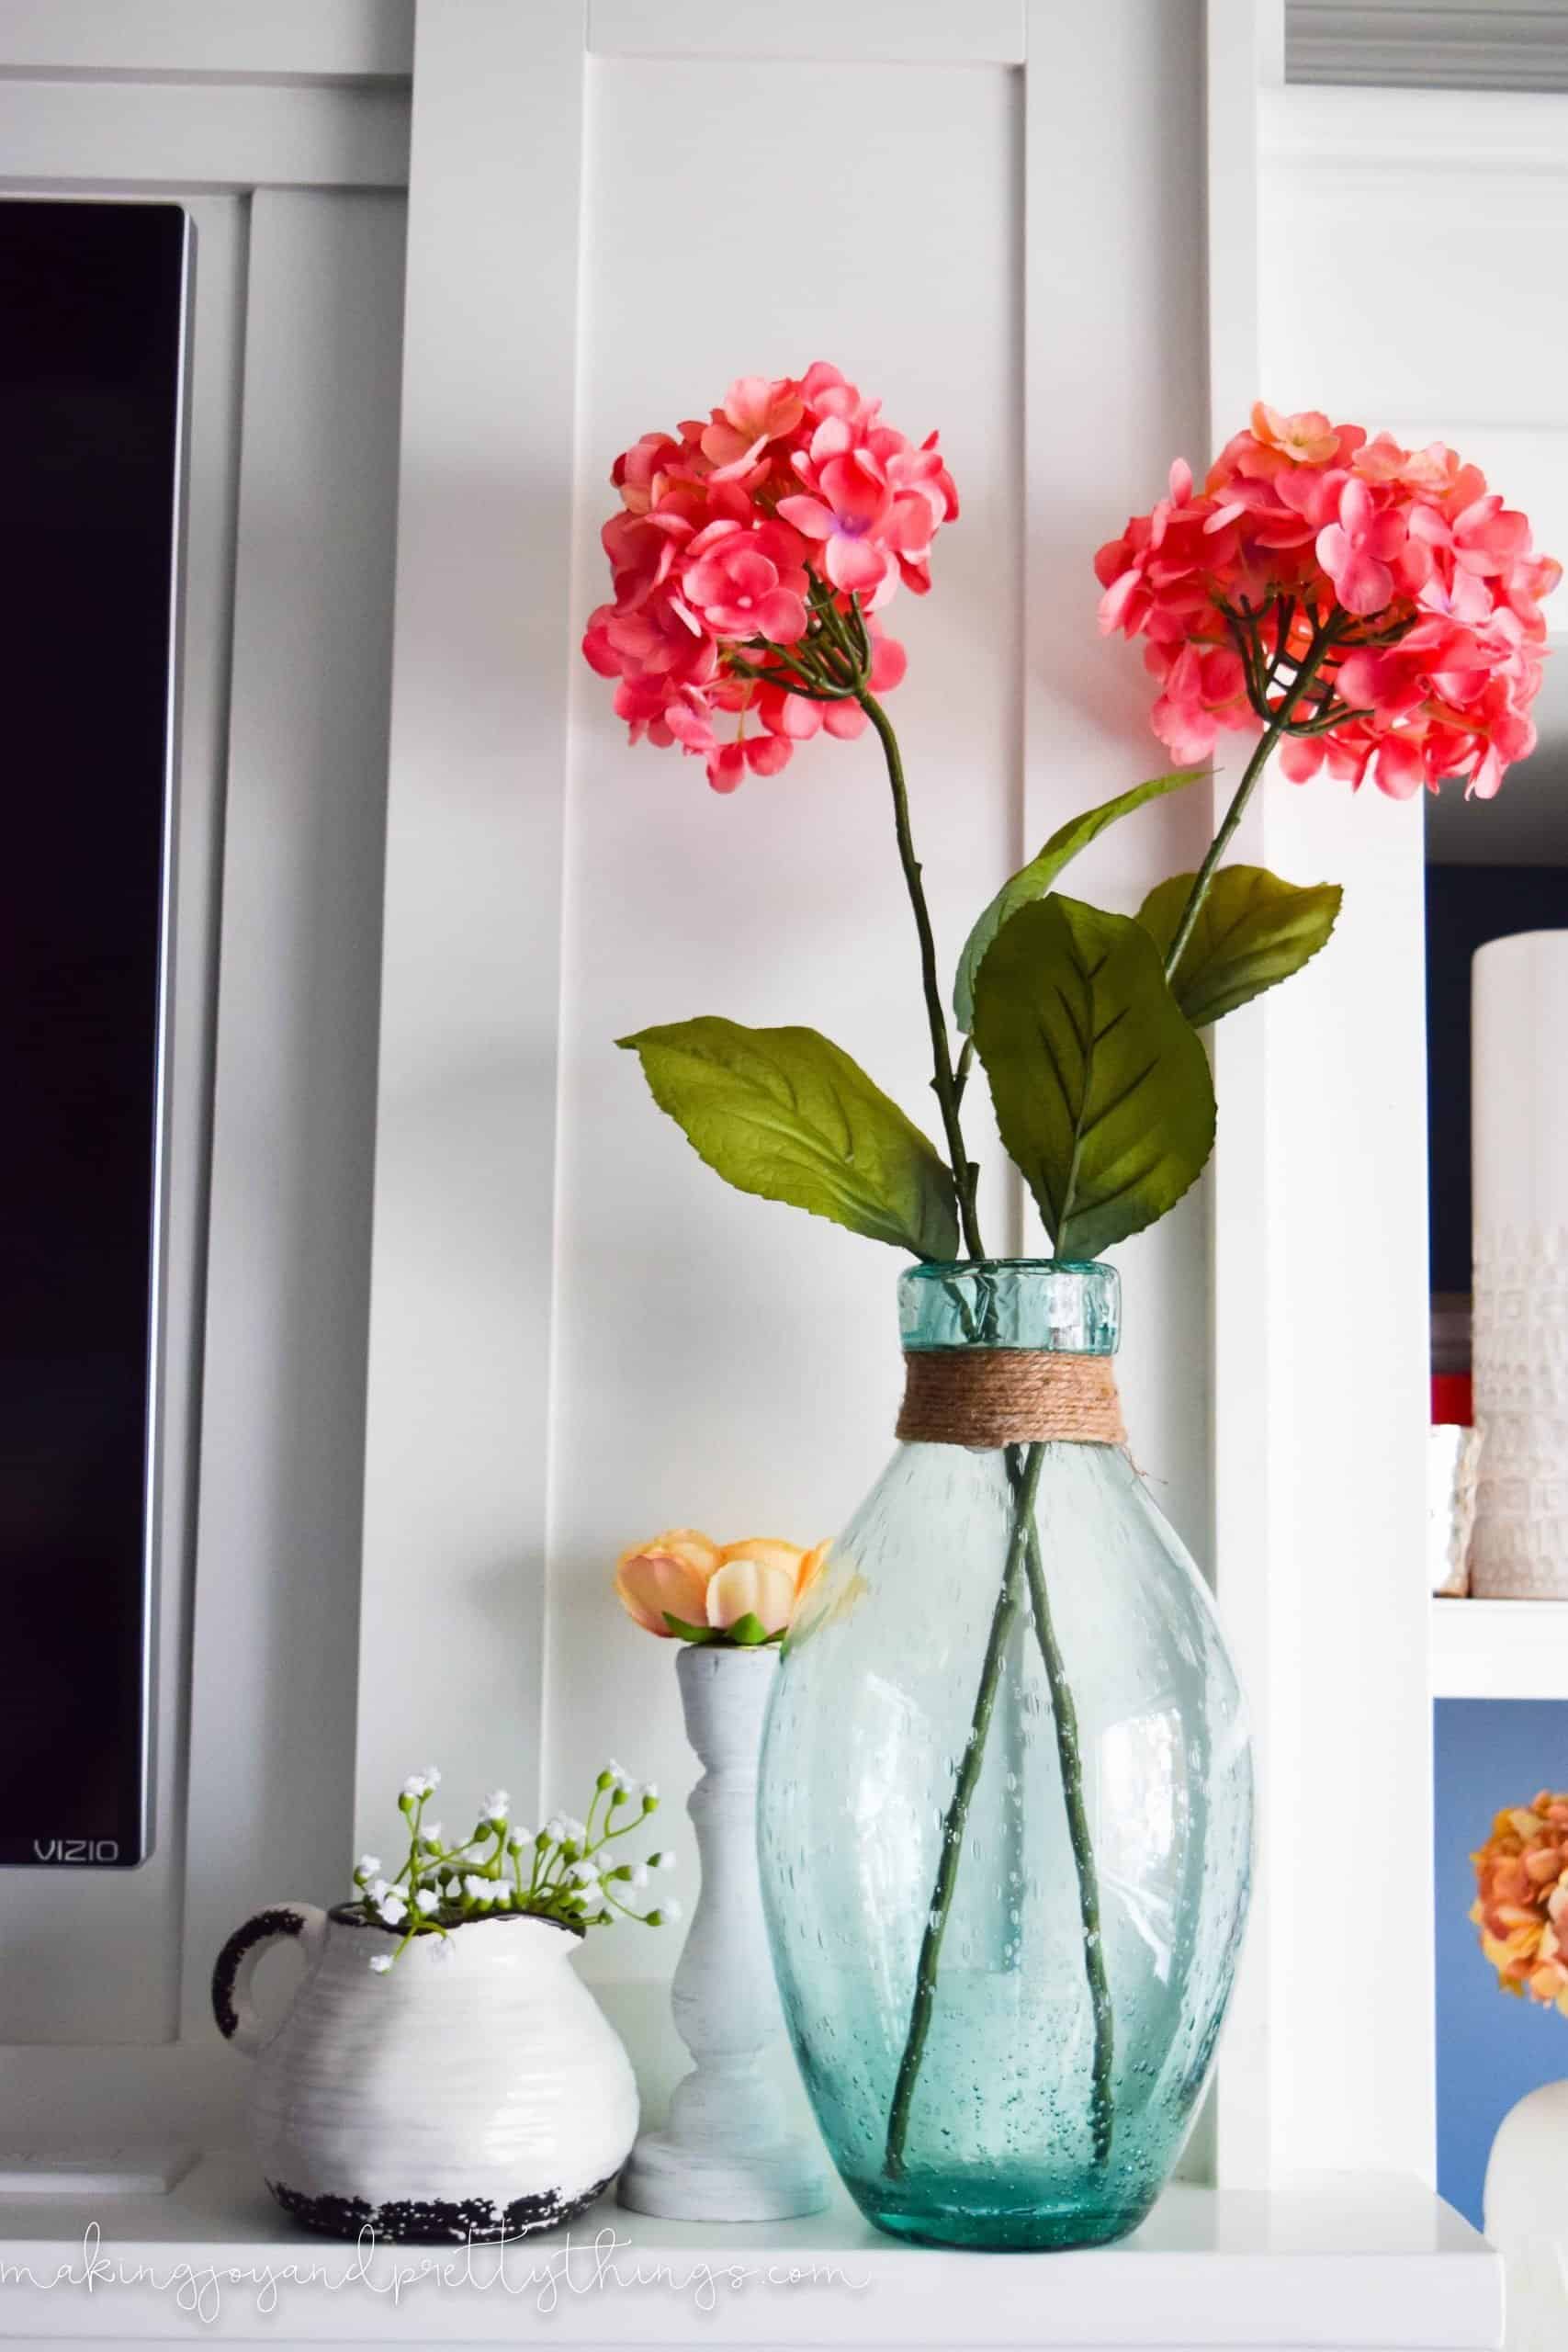 Two stems of bright pink hydrangea blooms in a blue seaglass vase. The vase sits on a mantle next to a small white ceramic jar and rustic candle holder.